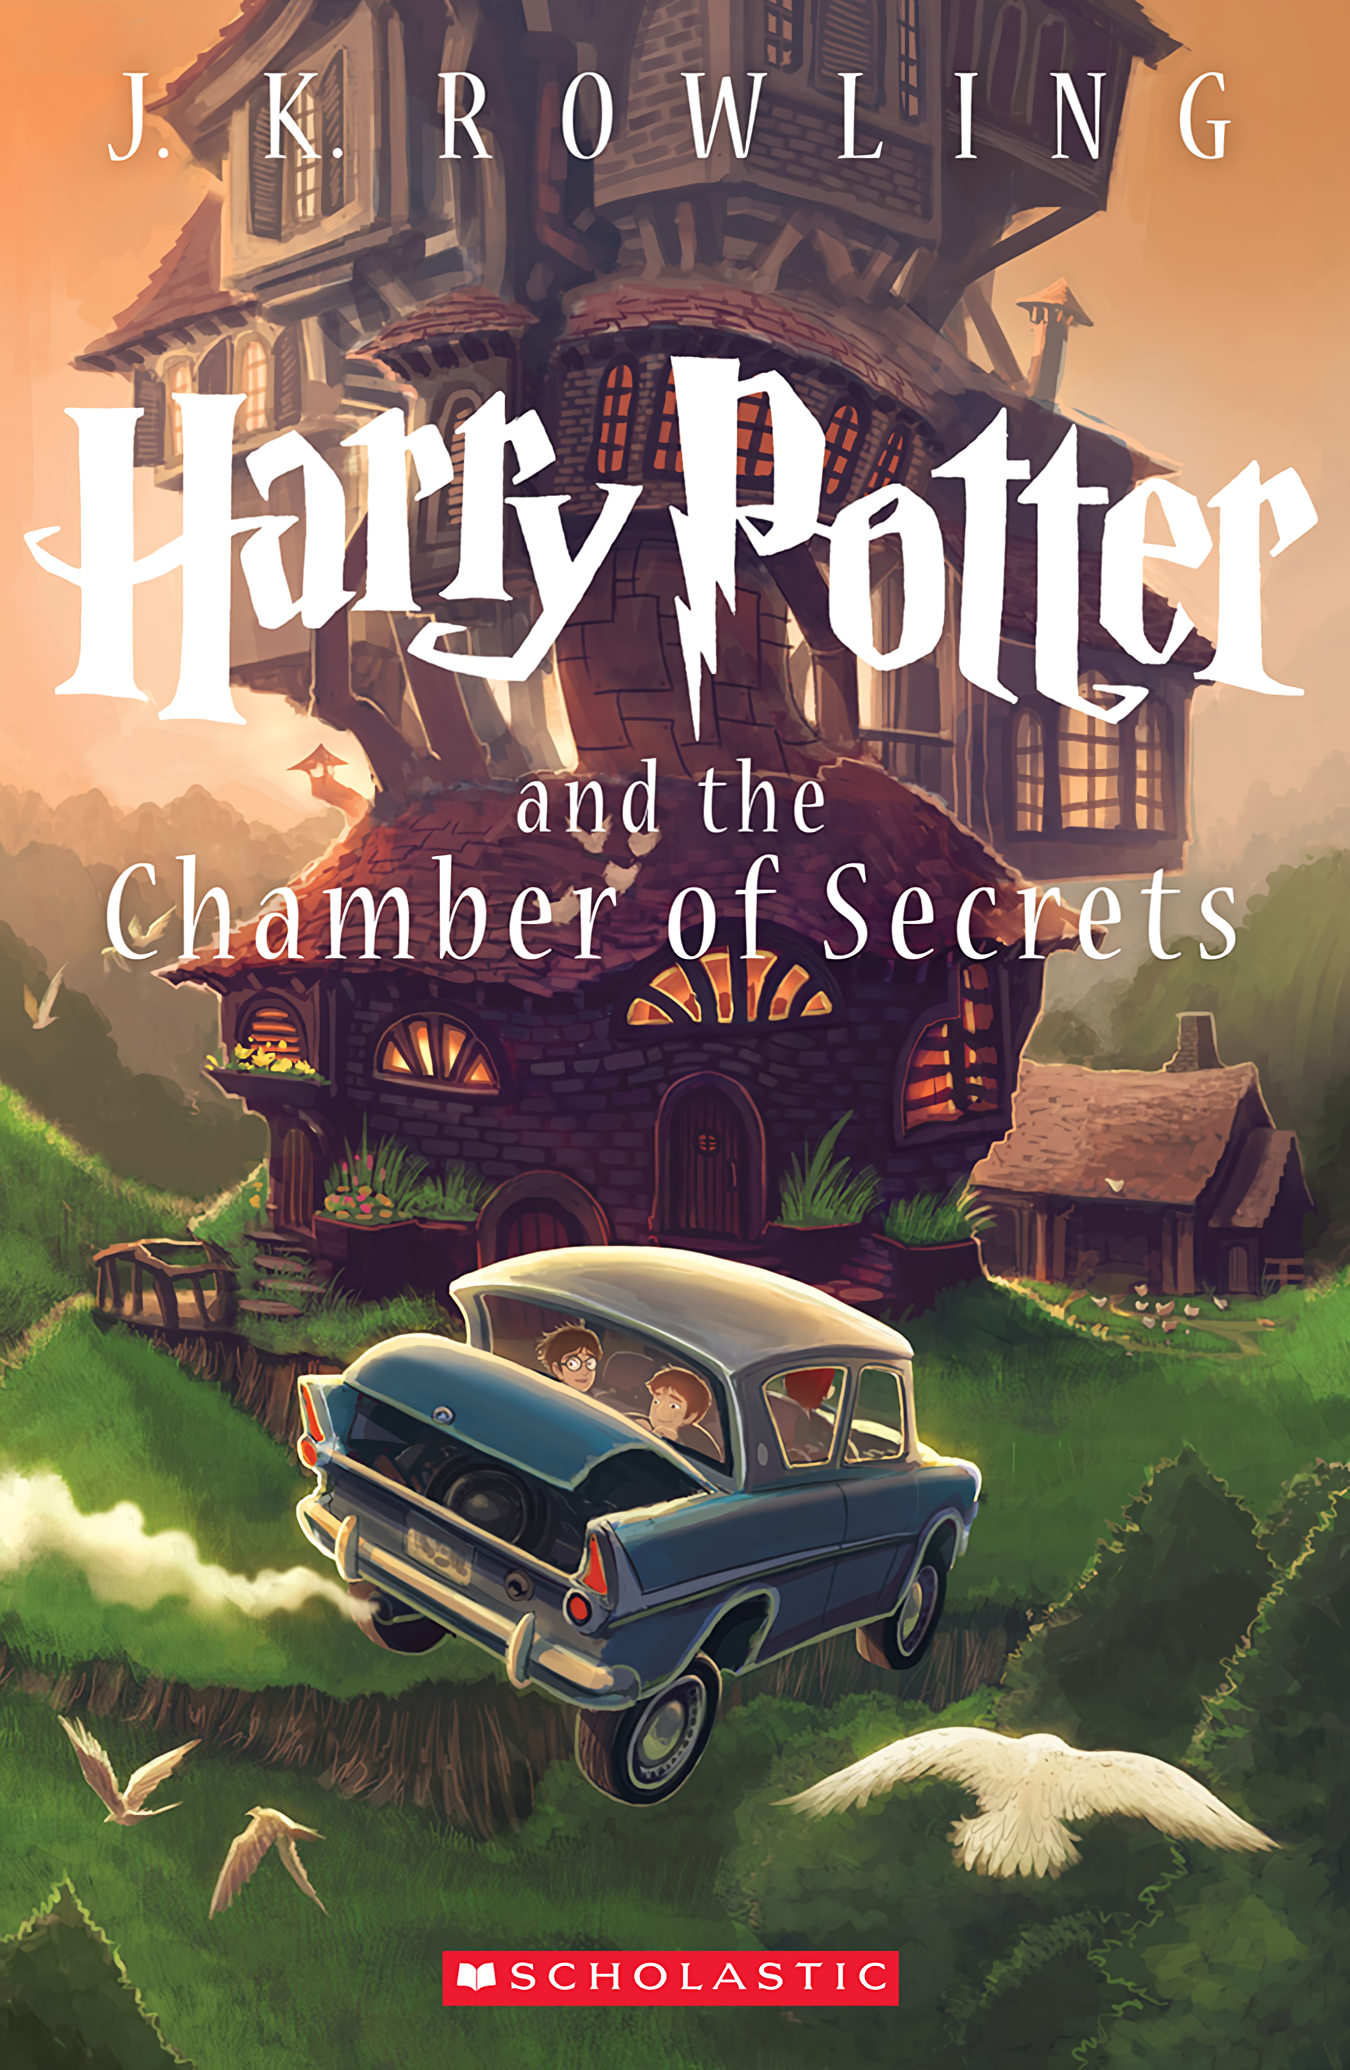 Harry Potter and the Chamber of Secrets book